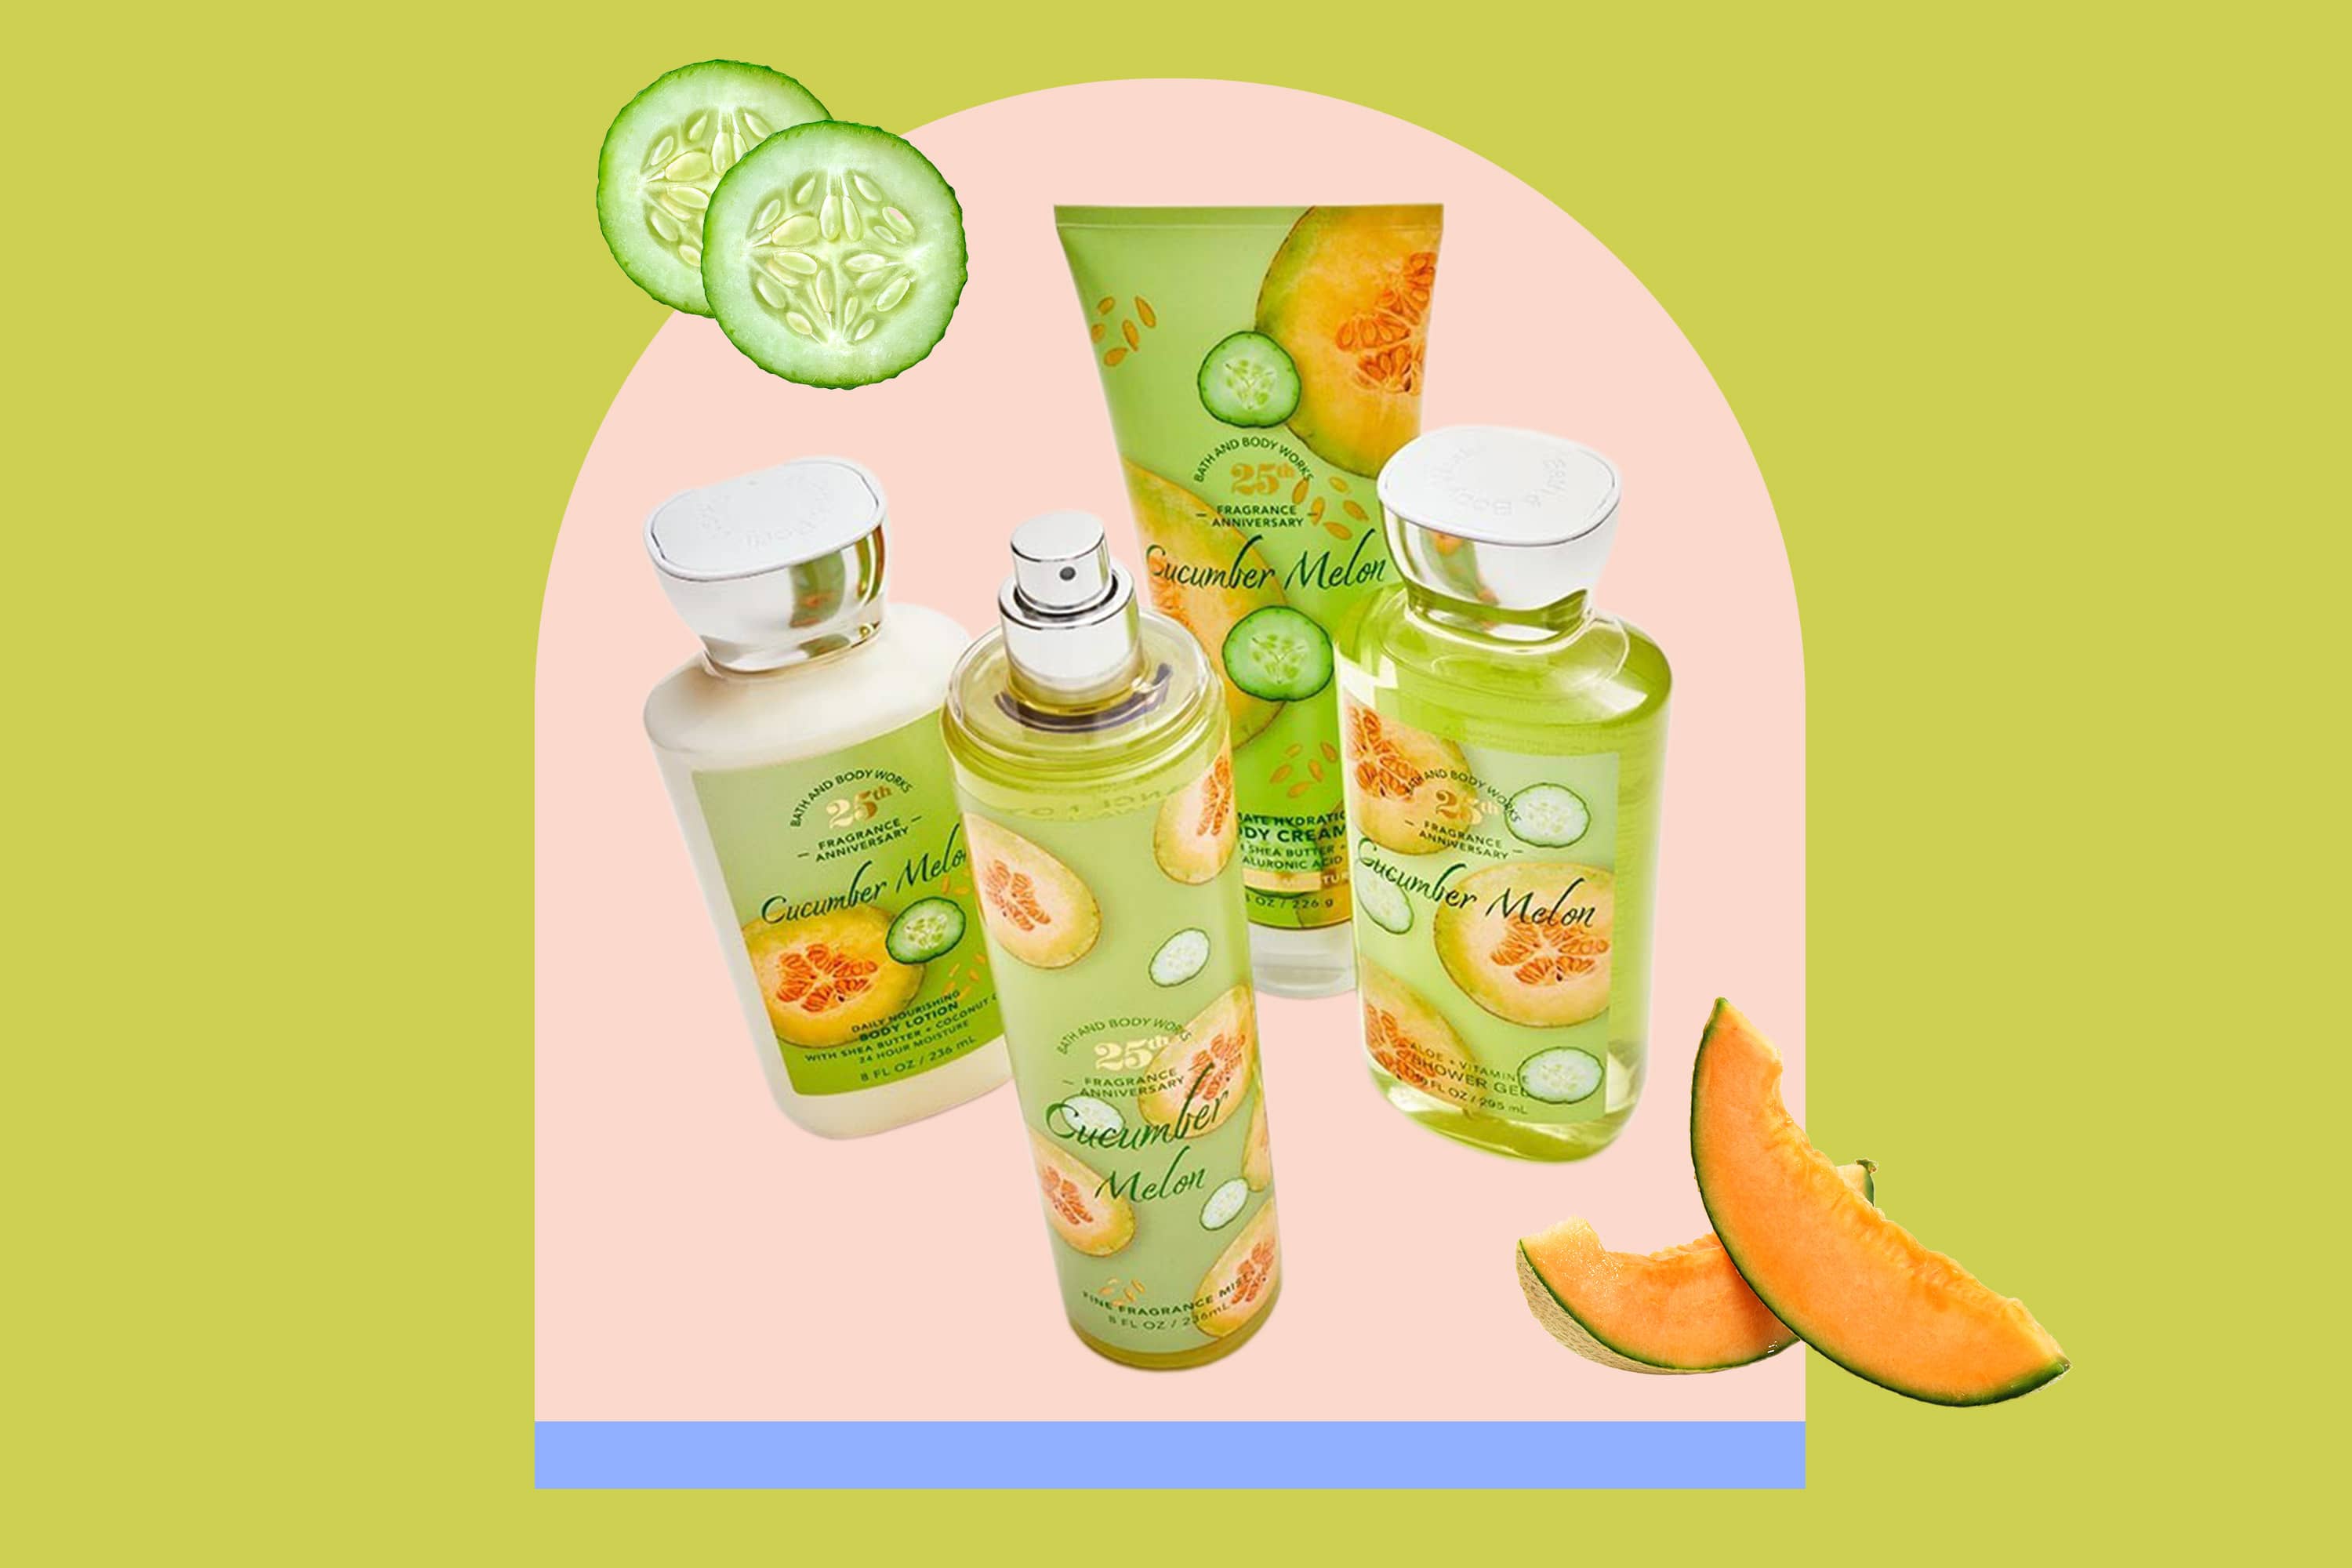 Cucumber Melon: Bath & Body Works' Scent Is Back